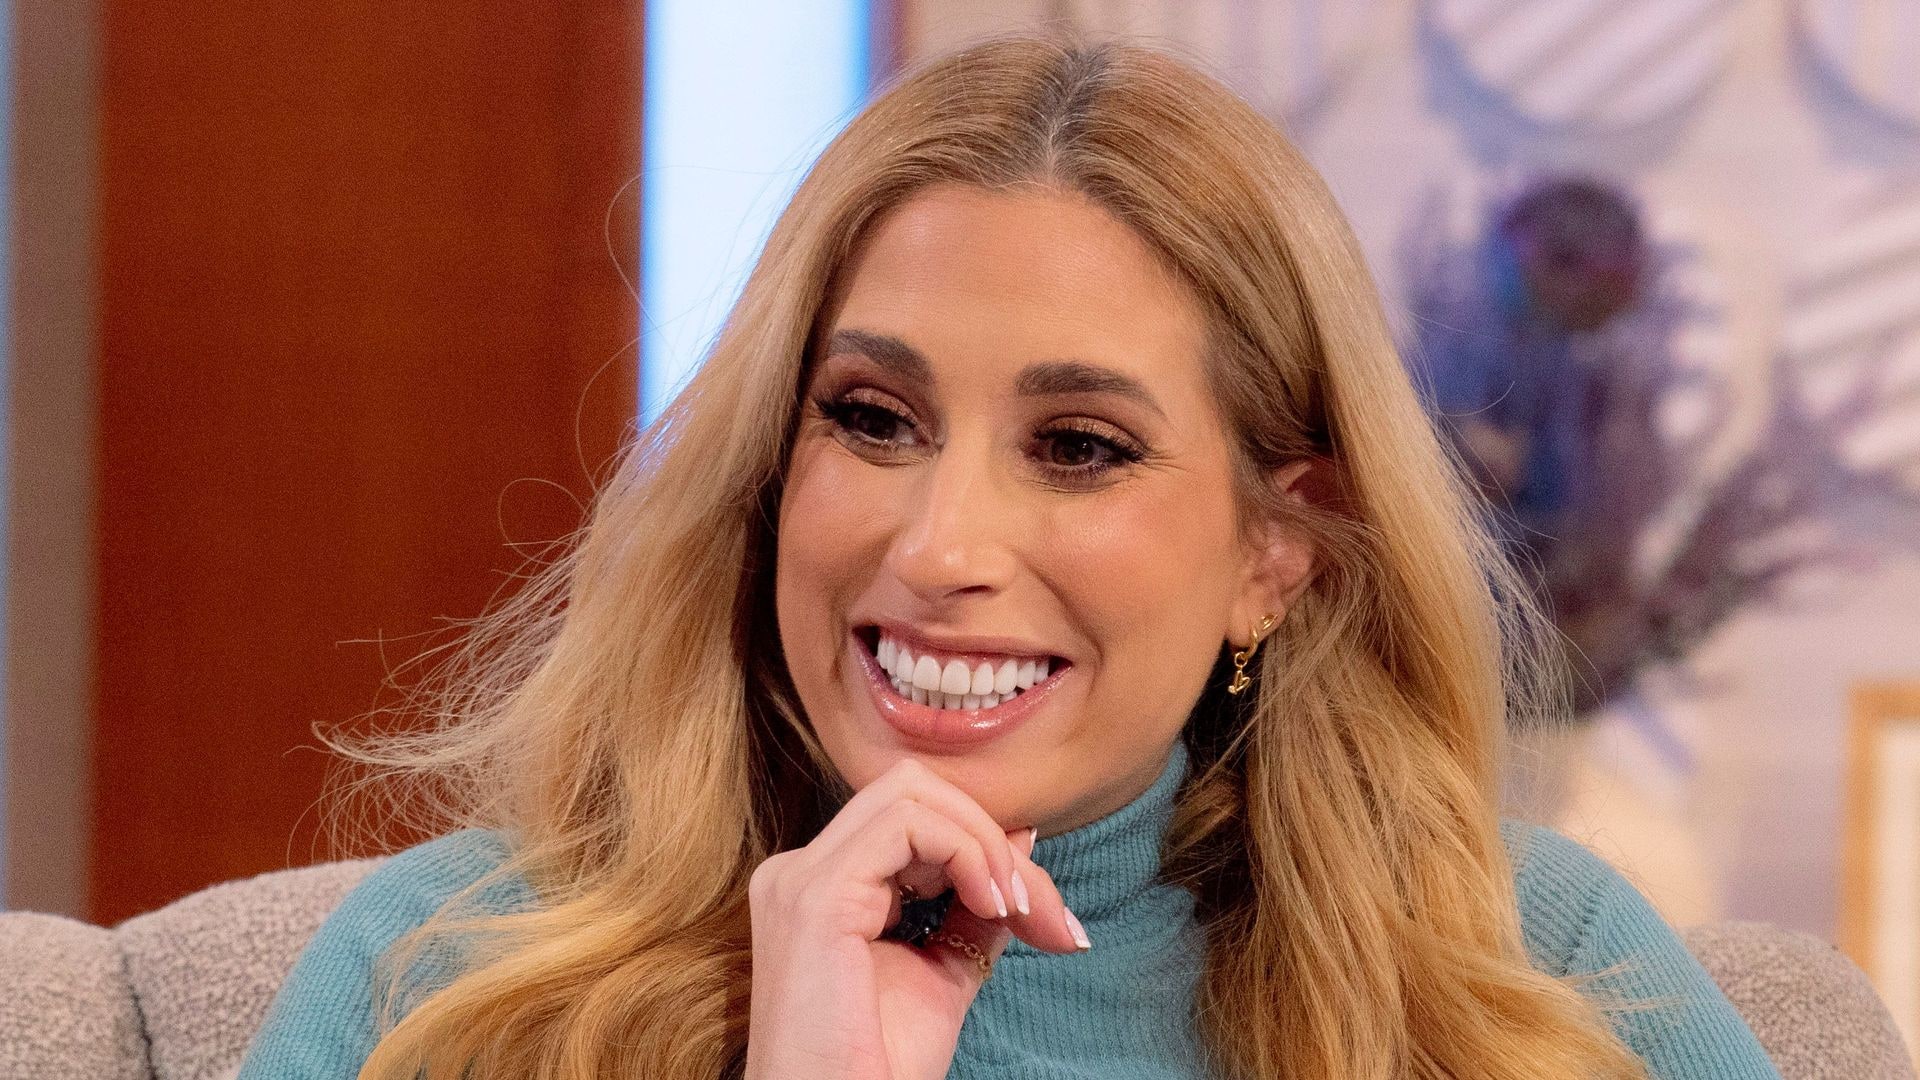 Stacey Solomon wears a turquoise dress on the Lorraine show